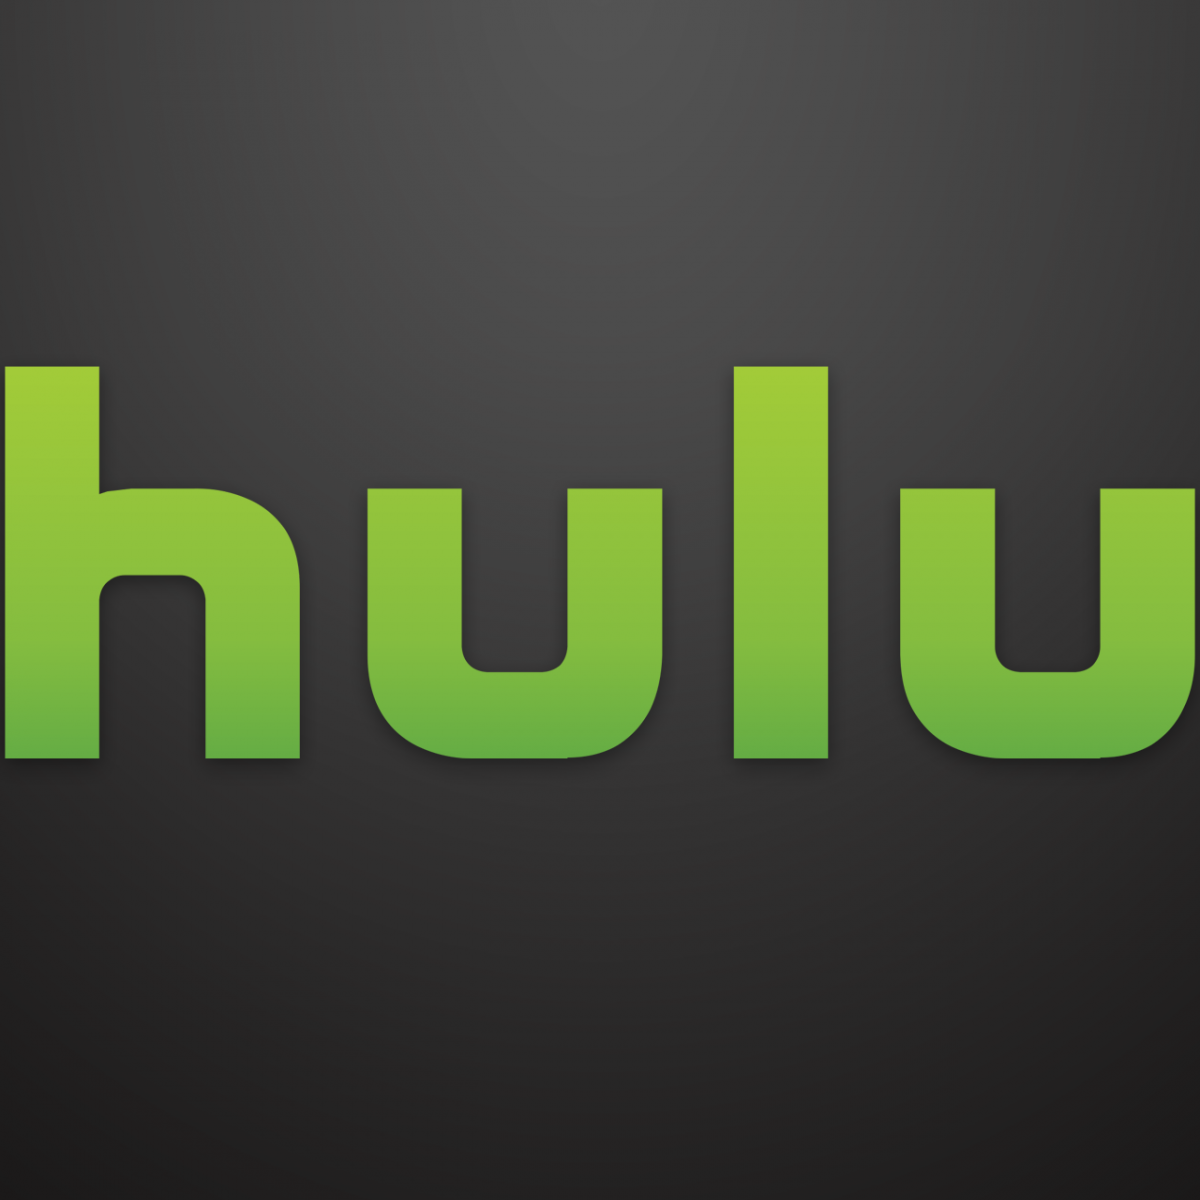 cannot download hulu app location